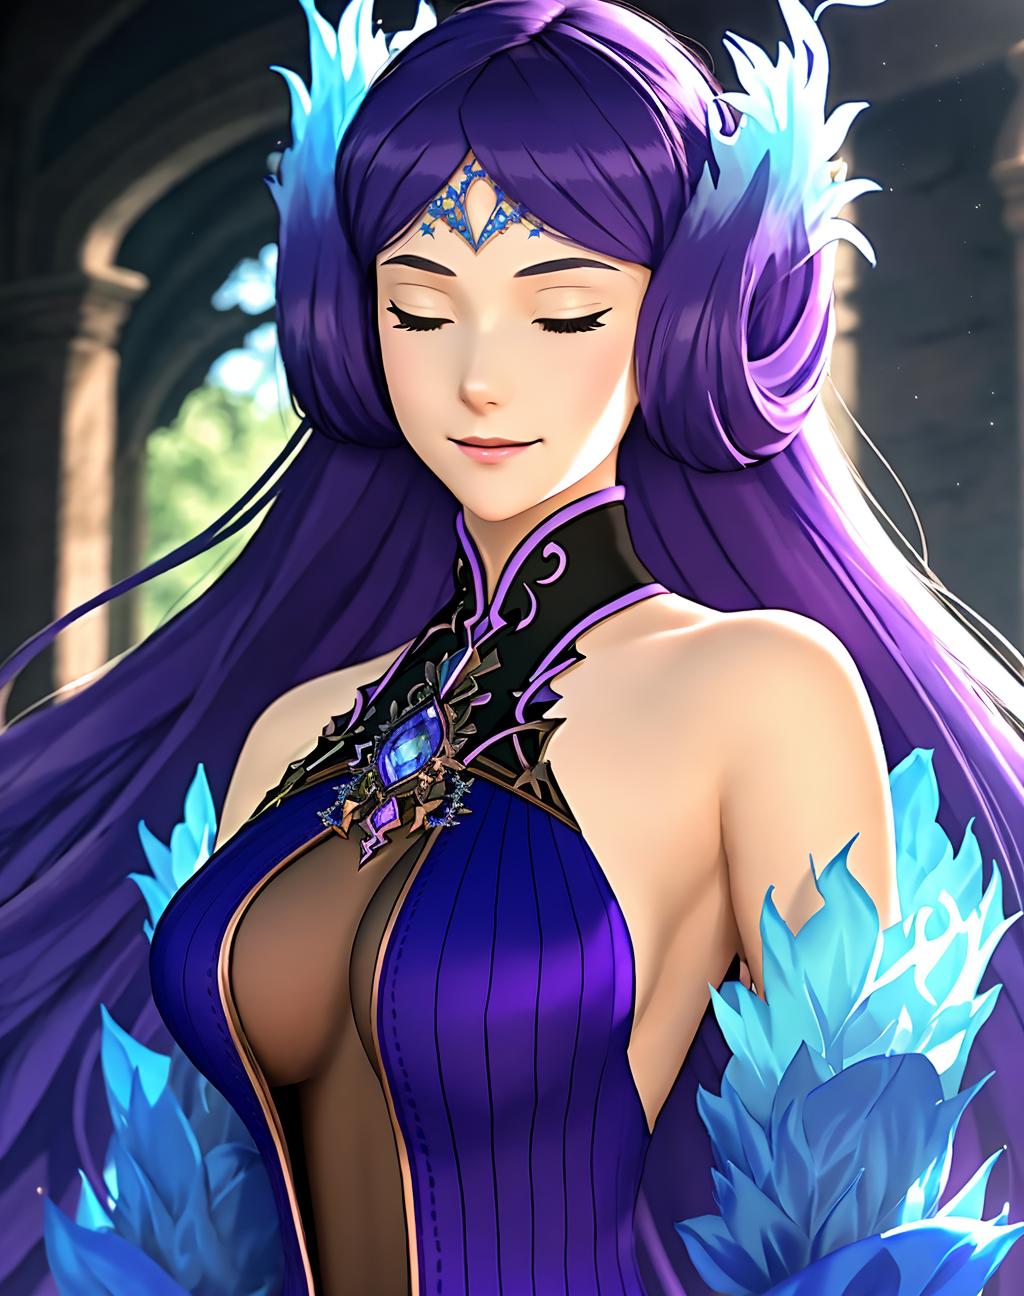 Brighid, Jewel of Mor Ardain - Xenoblade 2 (Character) image by EDG